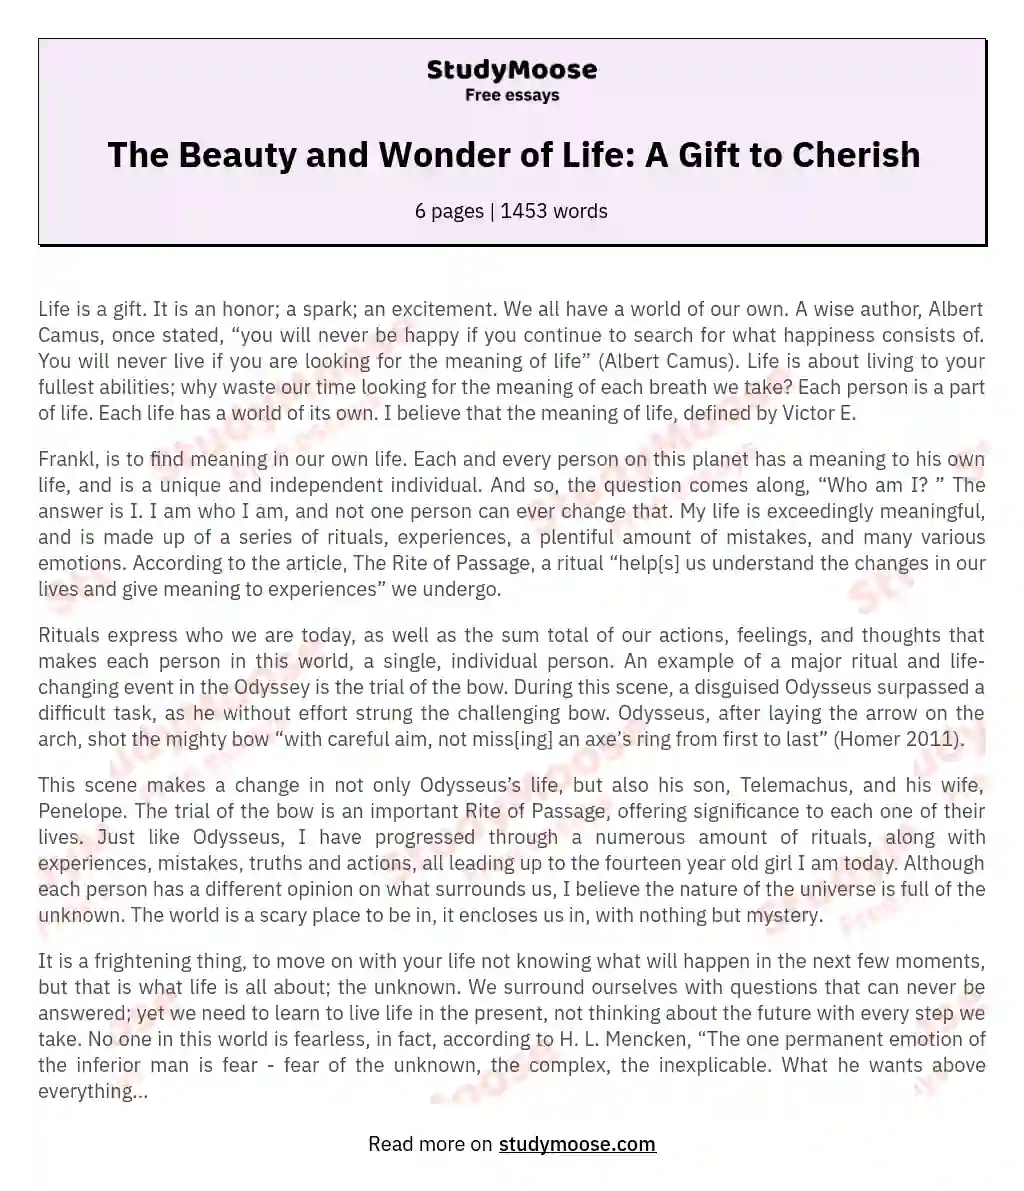 The Beauty and Wonder of Life: A Gift to Cherish essay